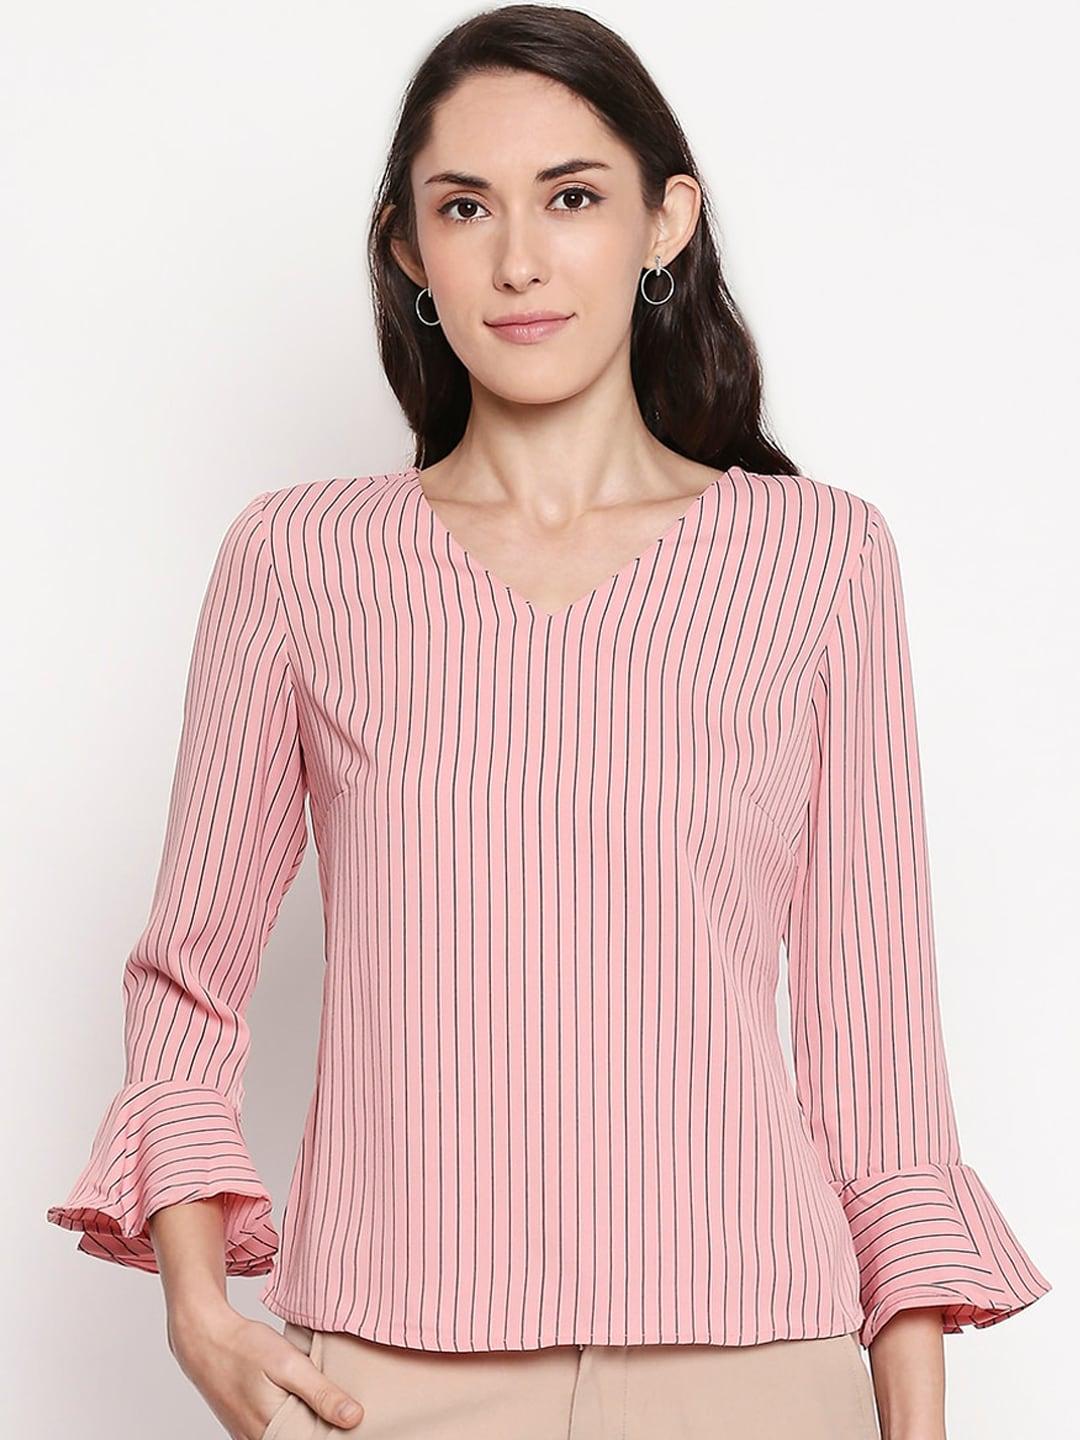 annabelle-by-pantaloons-women-pink-striped-top